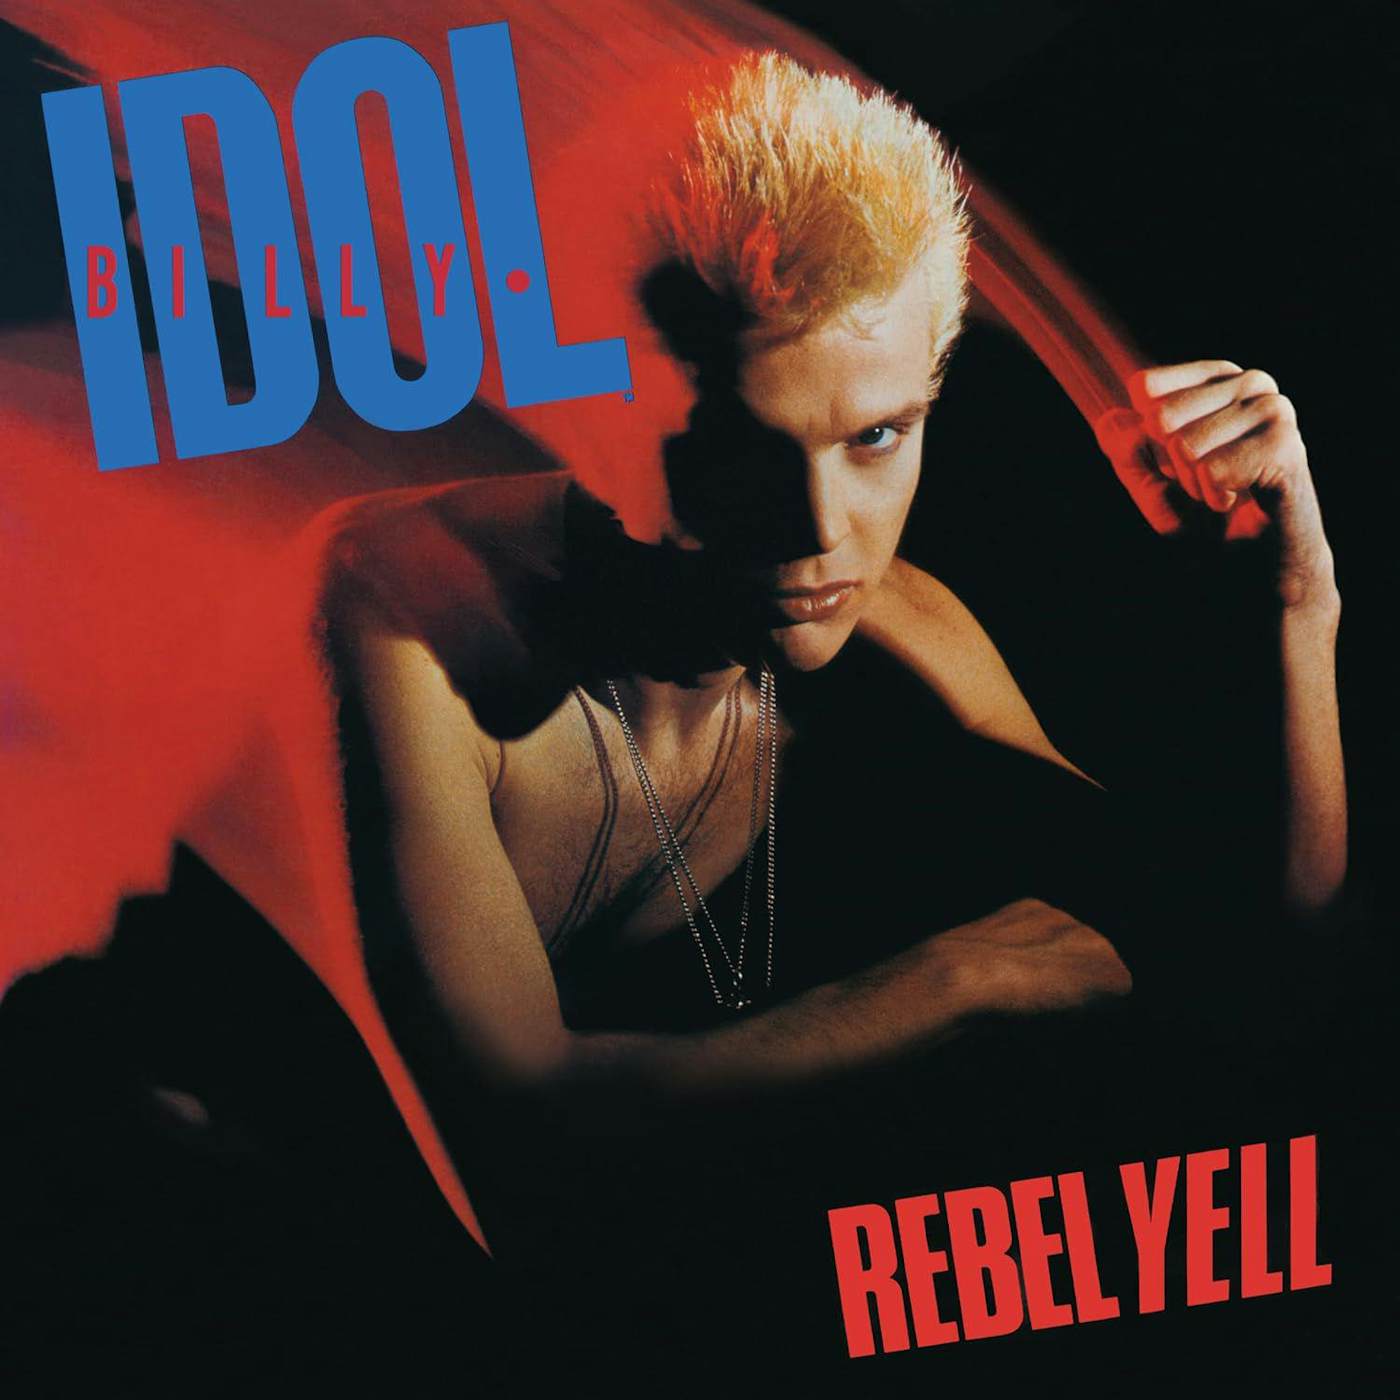 Billy Idol Rebel Yell (20th Anniversary Edition) [Deluxe/2LP] Vinyl Record